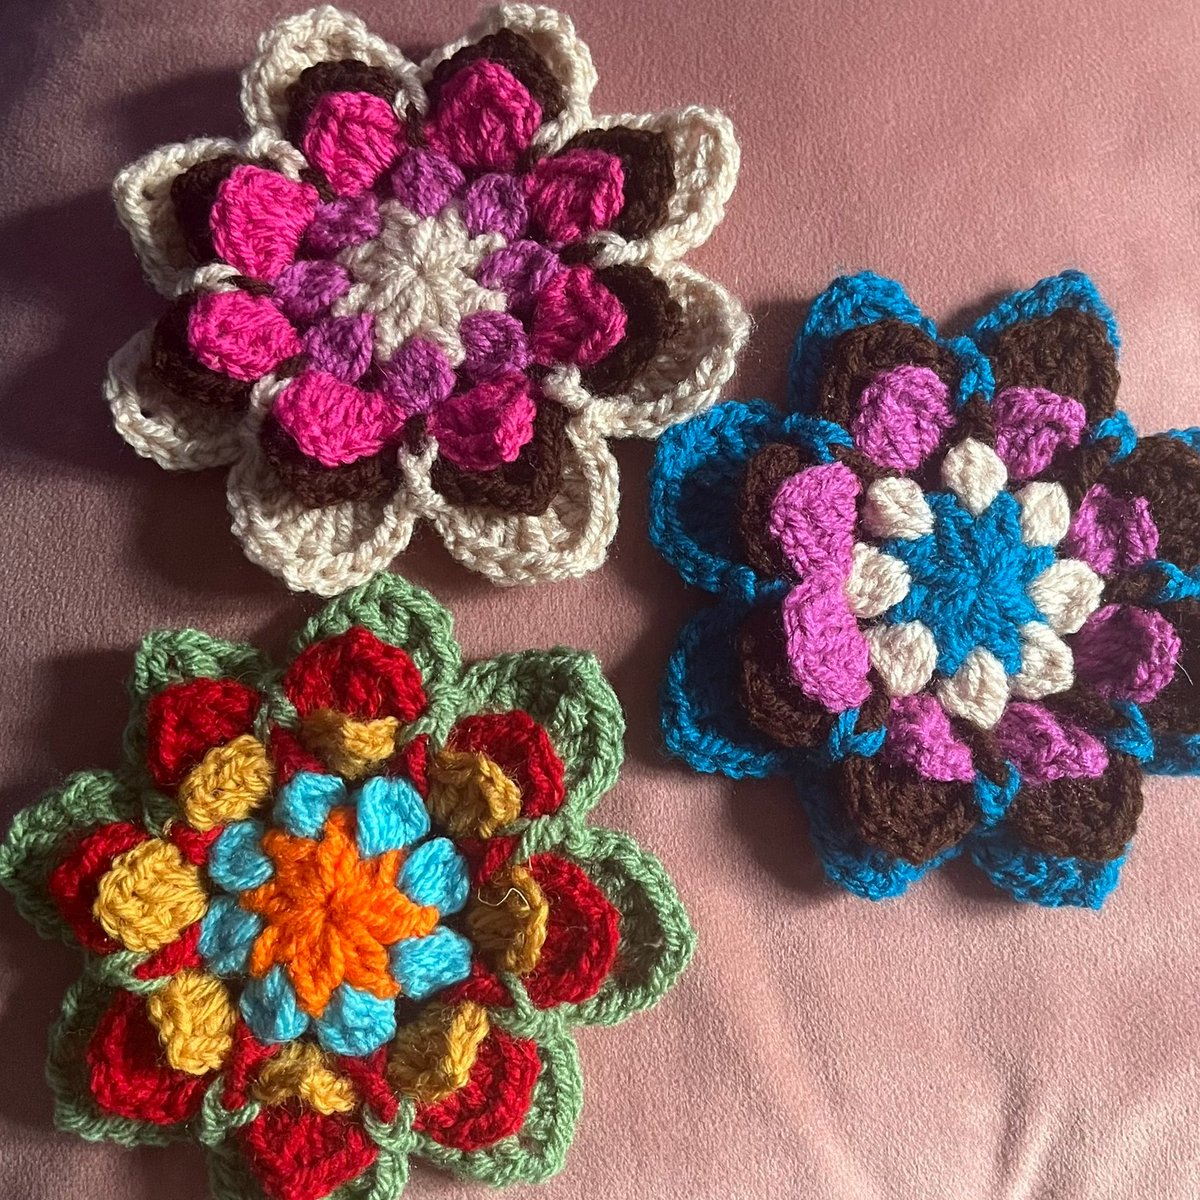 Crochet Flower Brooches 🌺 Handmade gifts from someone who has taken the time to make something unique just for them is so special 😊 A corsages for example, it's a simple gesture, but it's sure to be appreciated dwcrochetpatterns.etsy.com #MHHSBD #craftbizparty #inbizhour